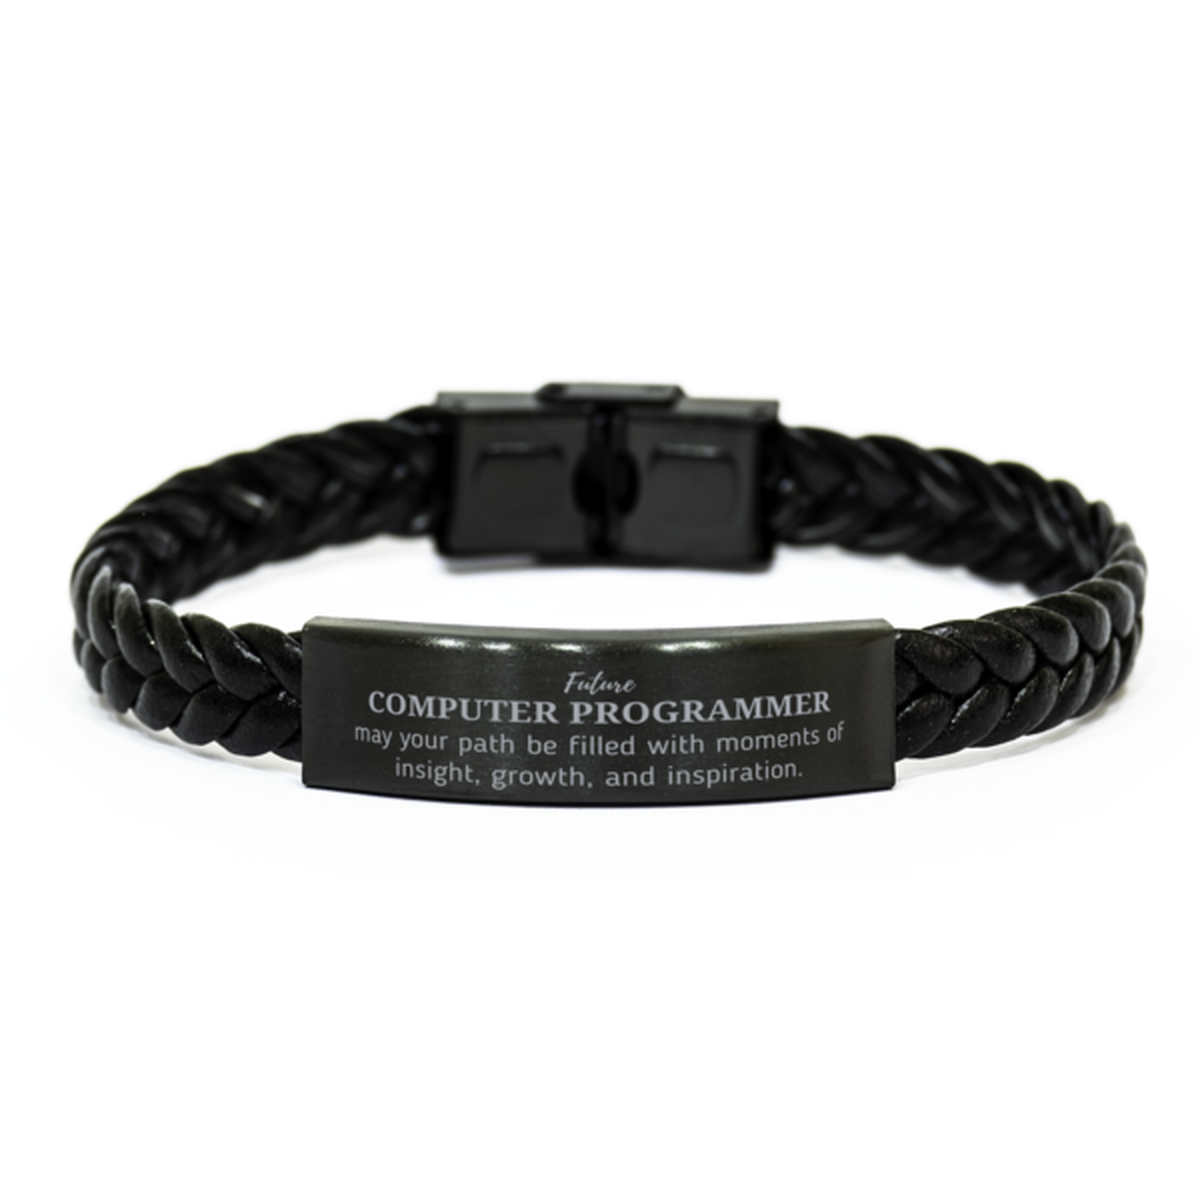 Future Computer Programmer Gifts, May your path be filled with moments of insight, Graduation Gifts for New Computer Programmer, Christmas Unique Braided Leather Bracelet For Men, Women, Friends